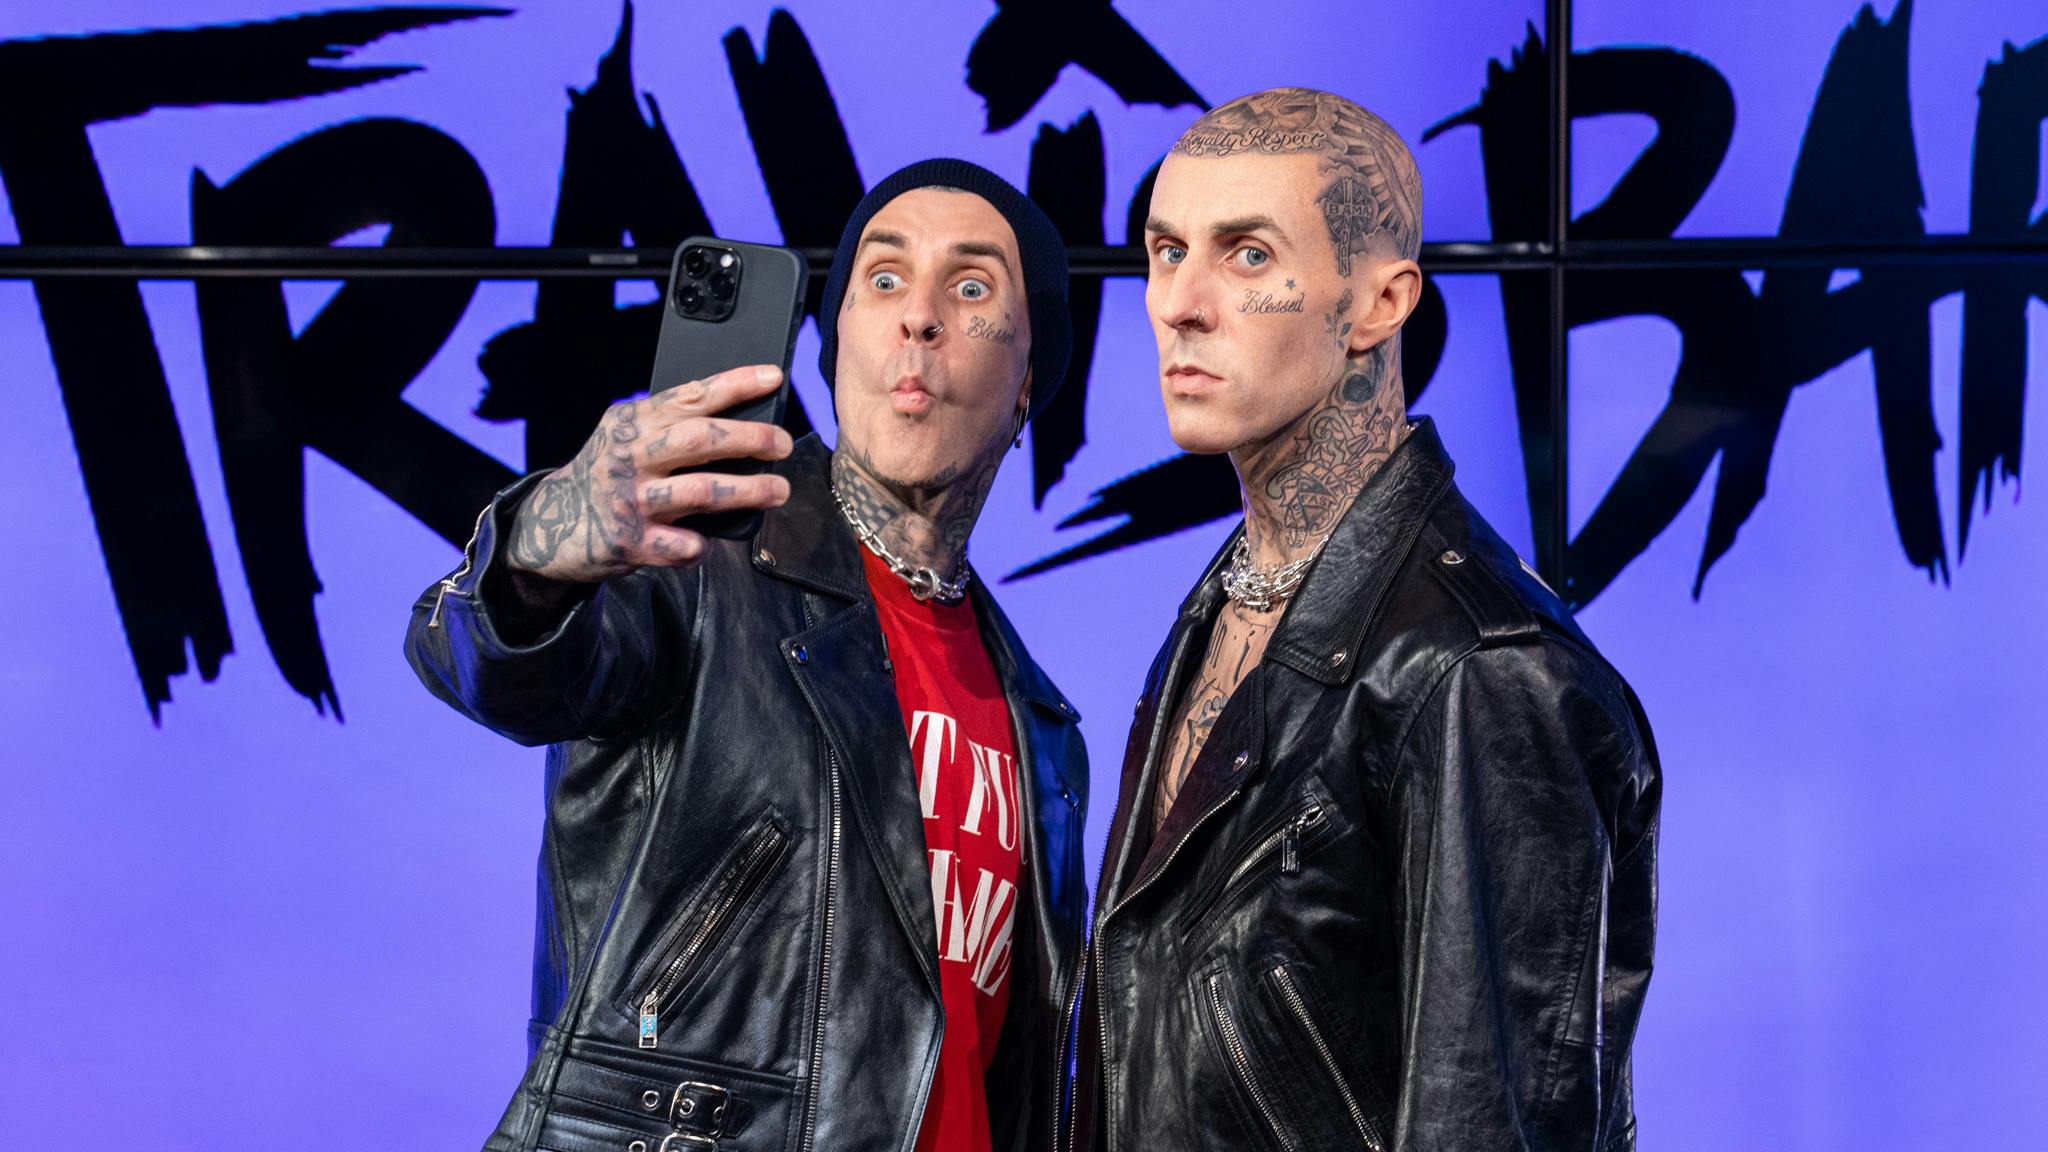 “It looks so f*cking real”: Travis Barker has his own wax figure at Madame Tussauds now